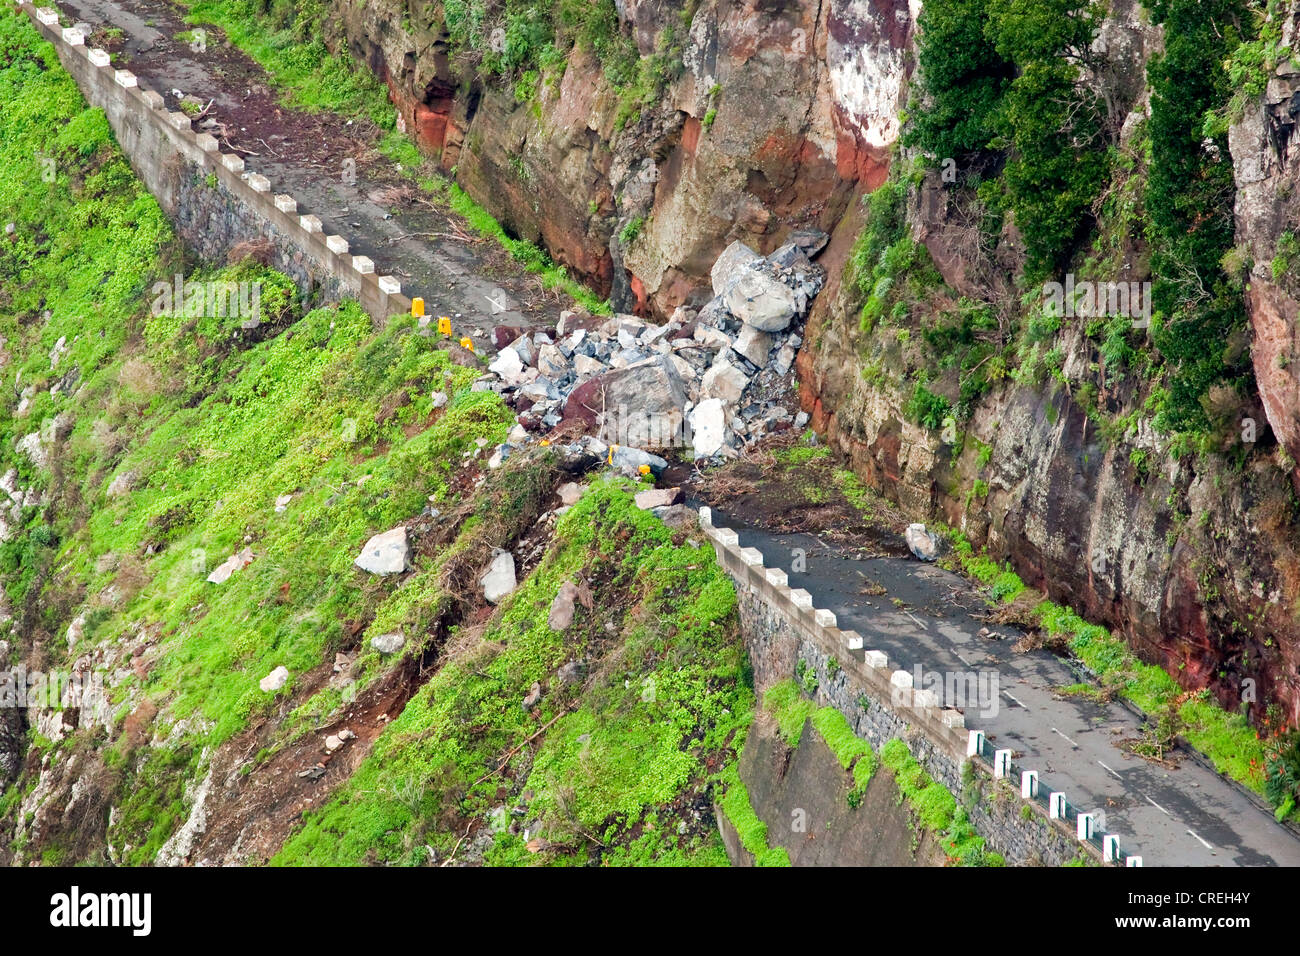 Road blocked by a landslide, Corral of the Nuns or Curral das Freiras, Madeira, Portugal, Europe Stock Photo